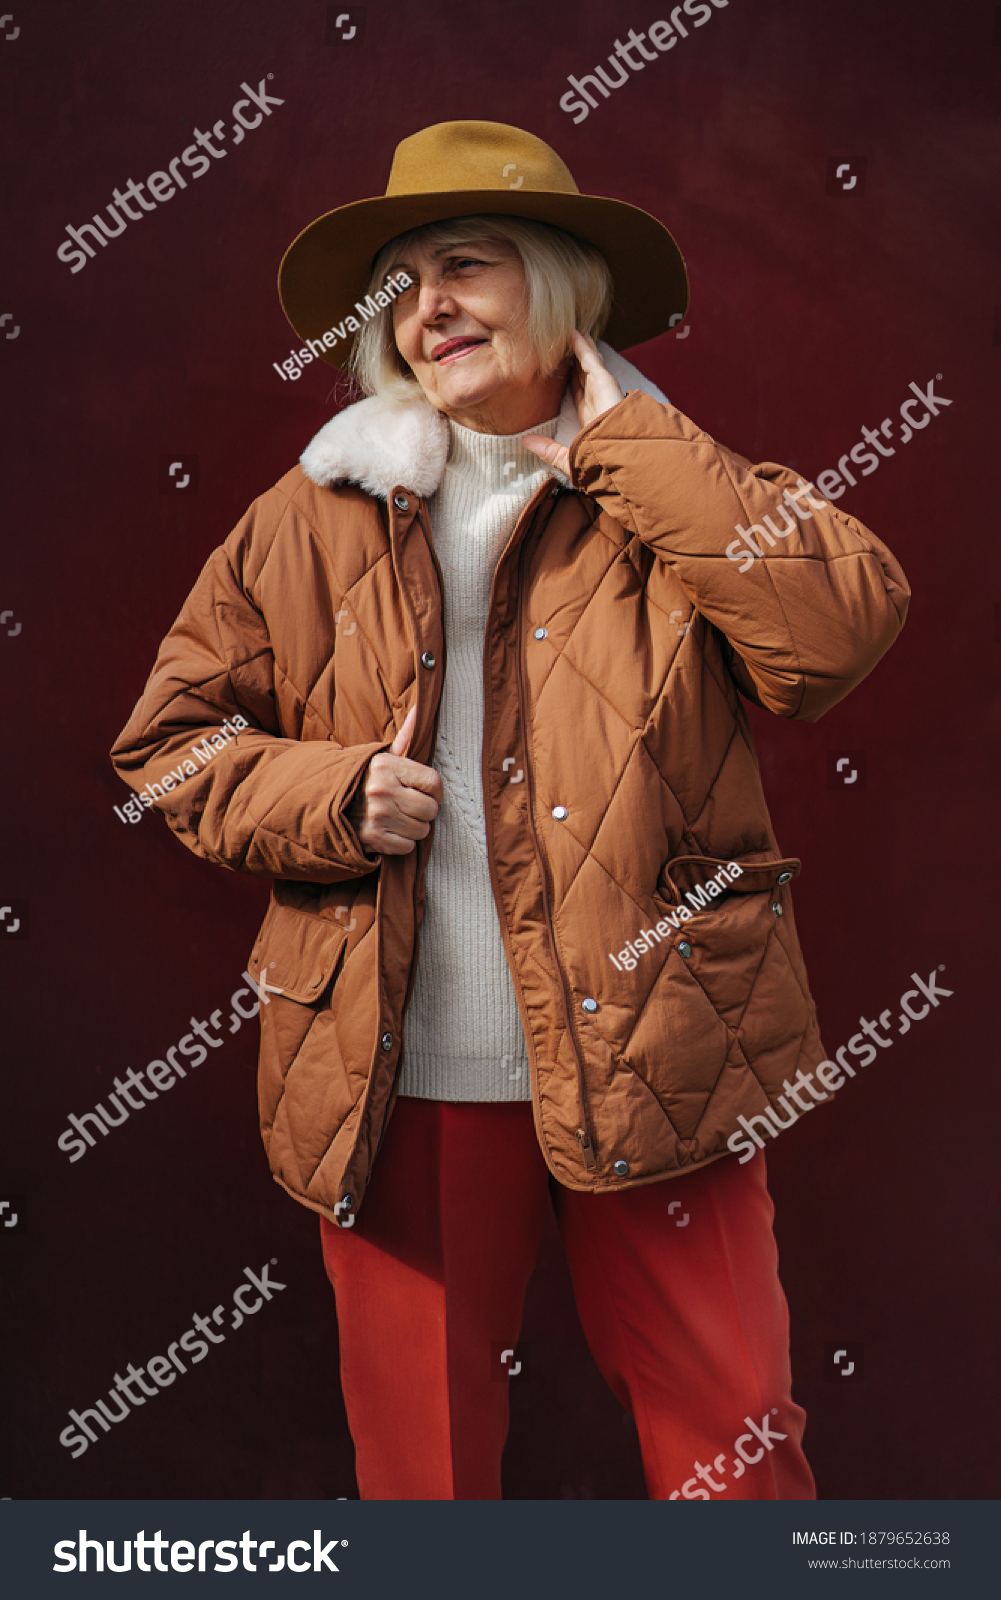 Senior woman in trendy outerwear and hat looking away while standing against vinous wall. Aged female in stylish outerwear #1879652638